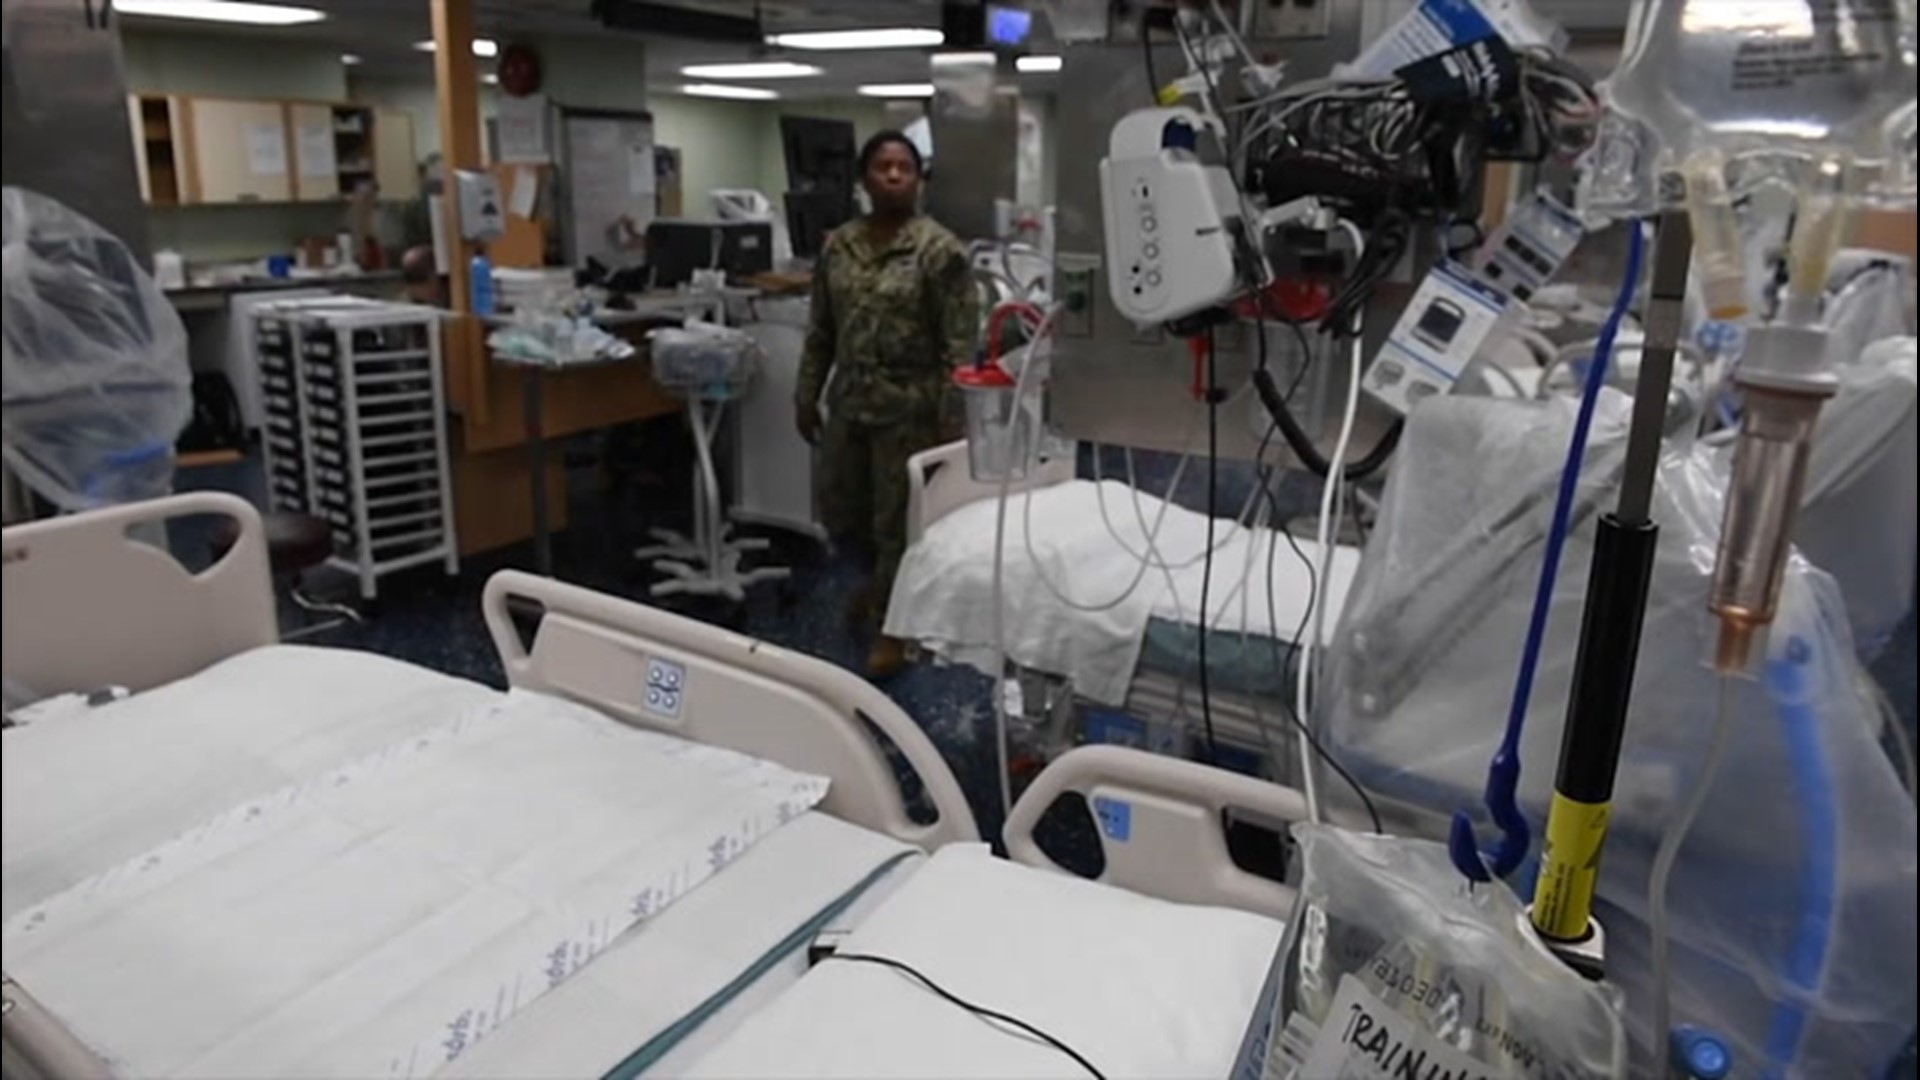 The USNS Comfort arrived in New York, New York, on March 31 to help provide relief for hospitals in the city that are overwhelmed by patients with COVID-19.